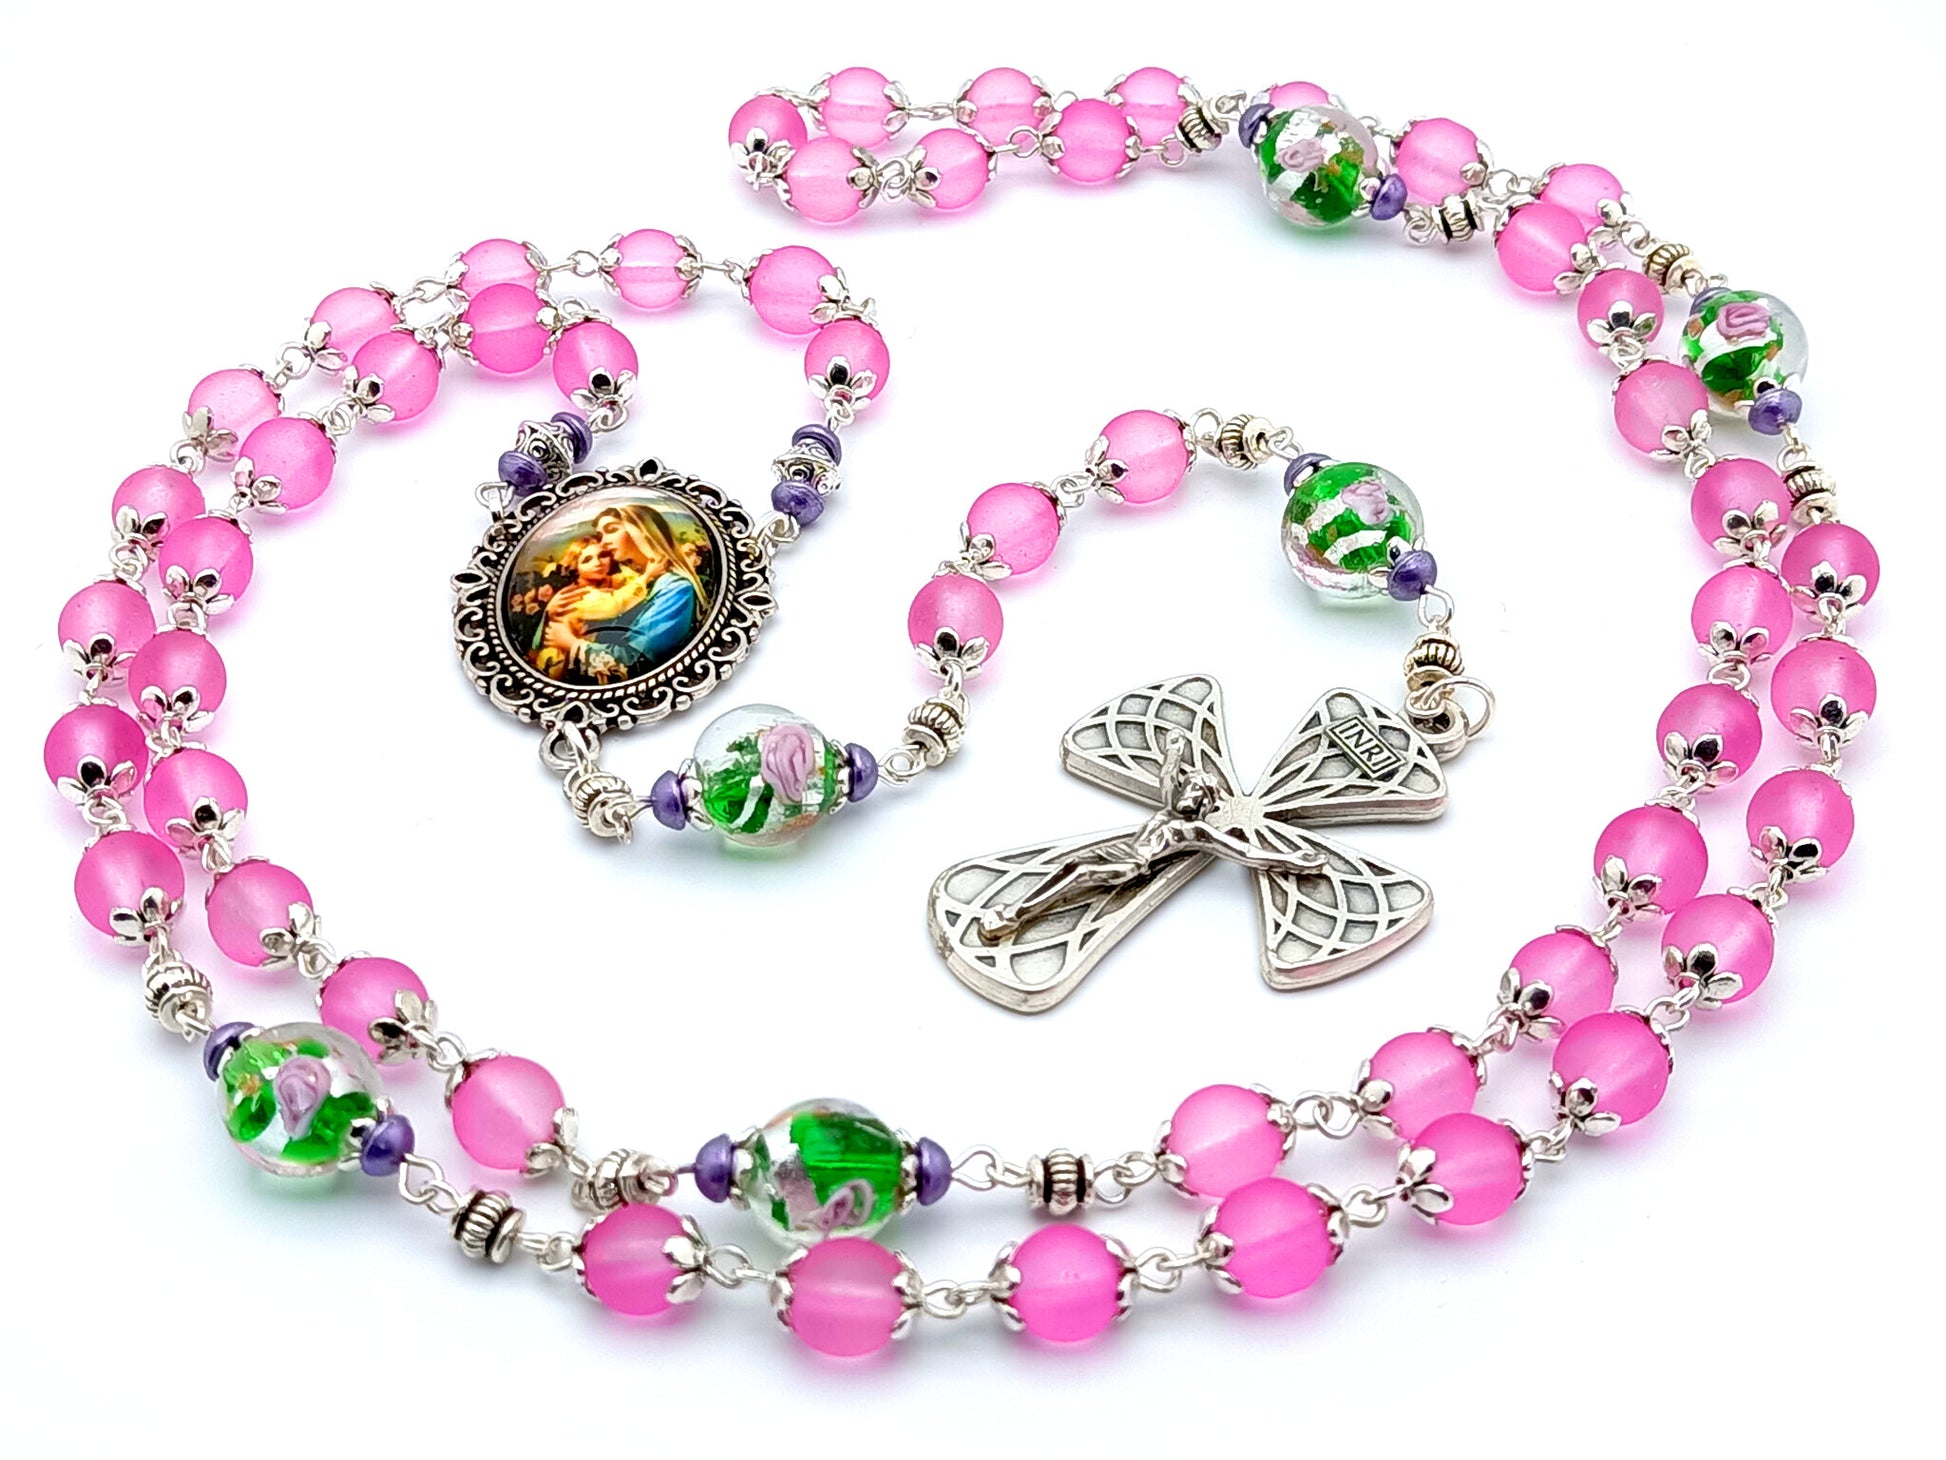 Virgin Mary unique rosary beads with pink and floral glass beads, silver harlequin crucifix and picture centre medal.